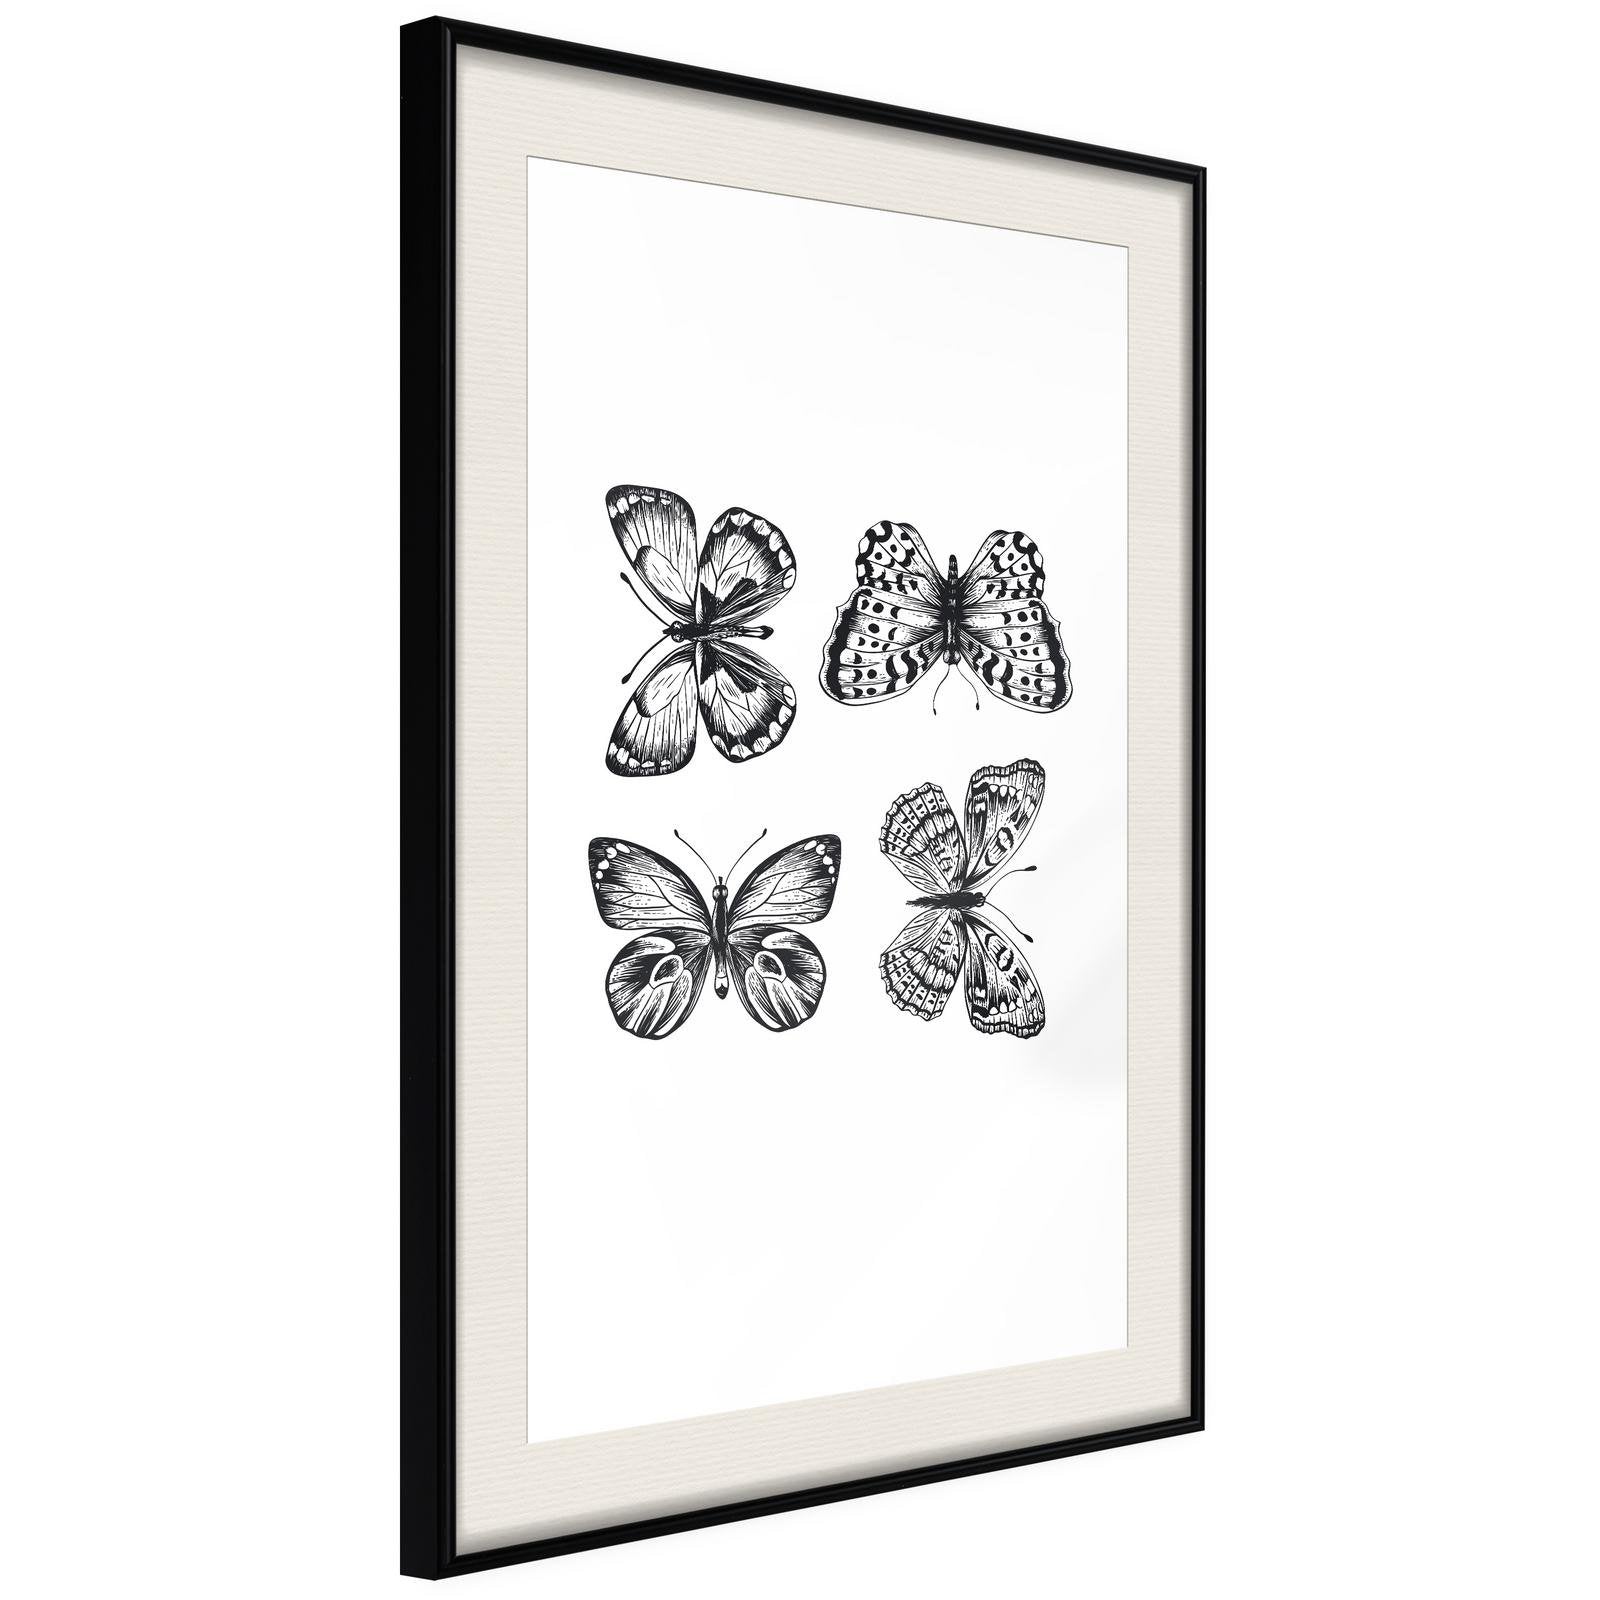 Inramad Poster / Tavla - Butterfly Collection III-Poster Inramad-Artgeist-20x30-Svart ram med passepartout-peaceofhome.se